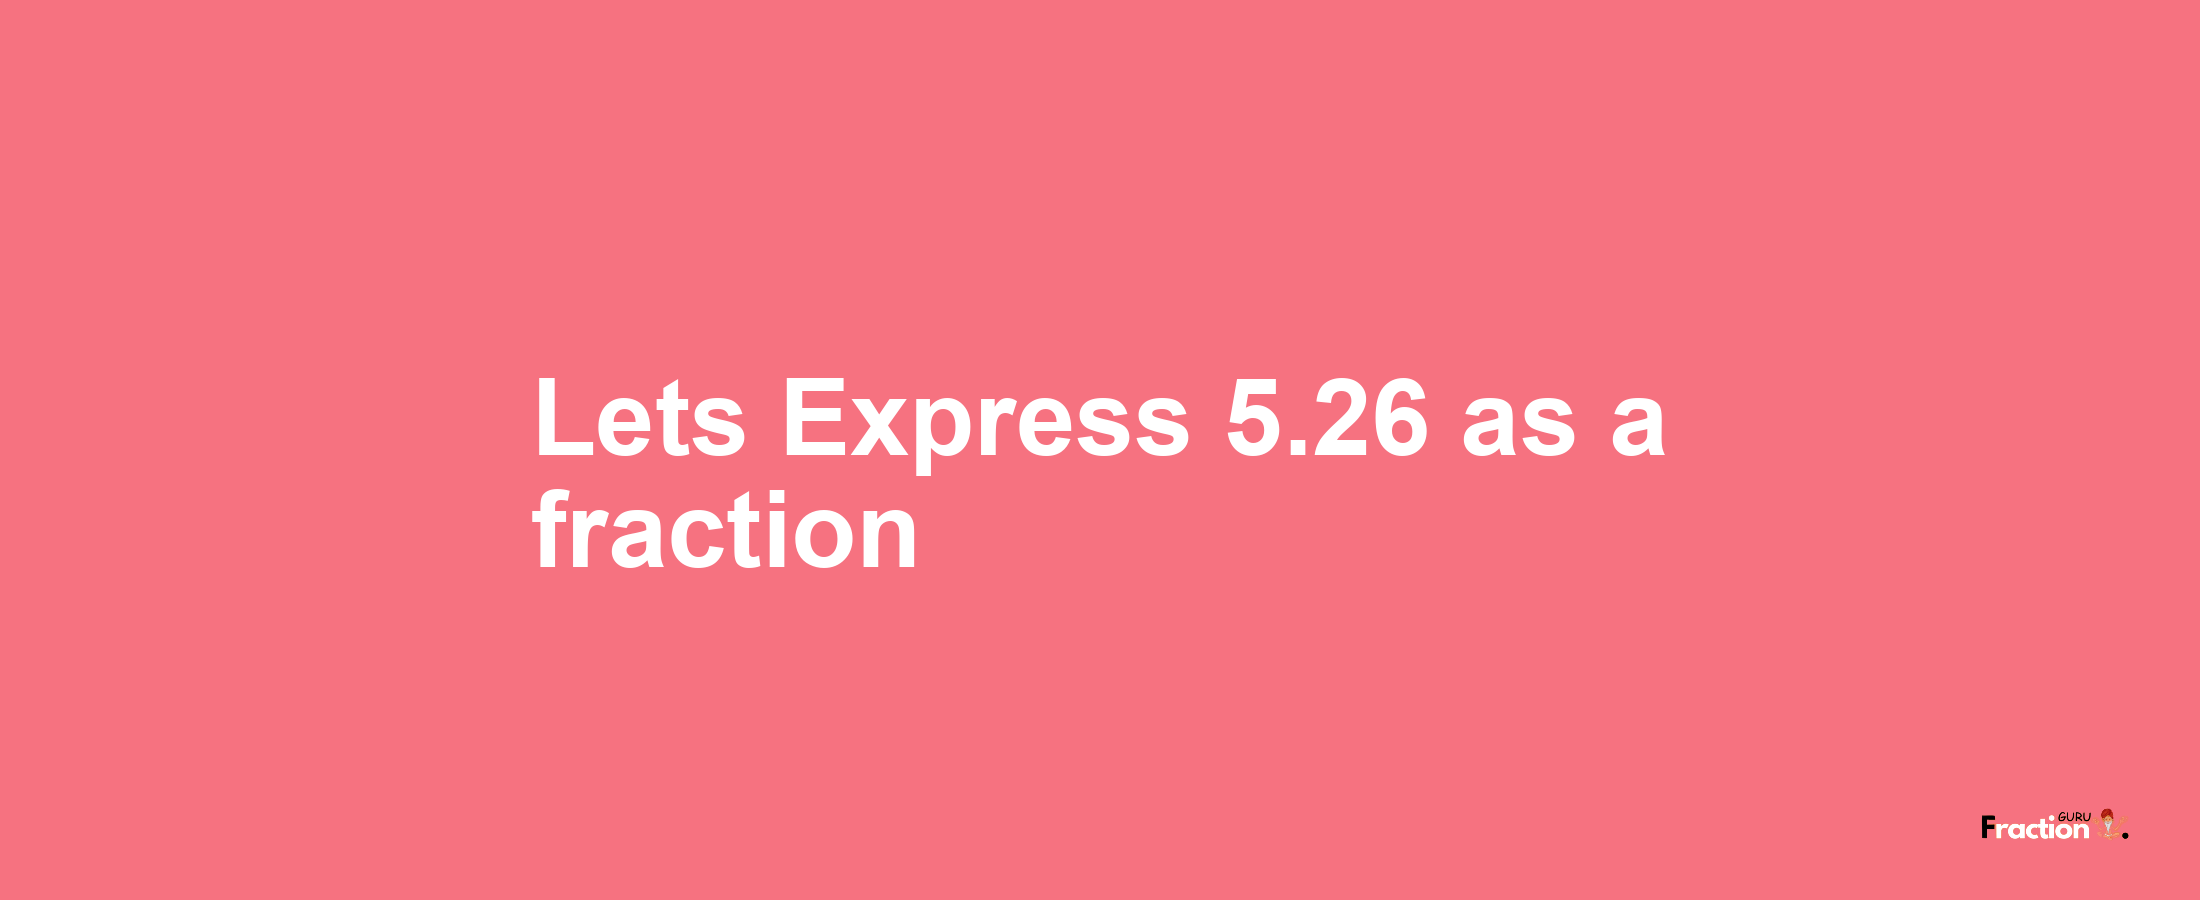 Lets Express 5.26 as afraction